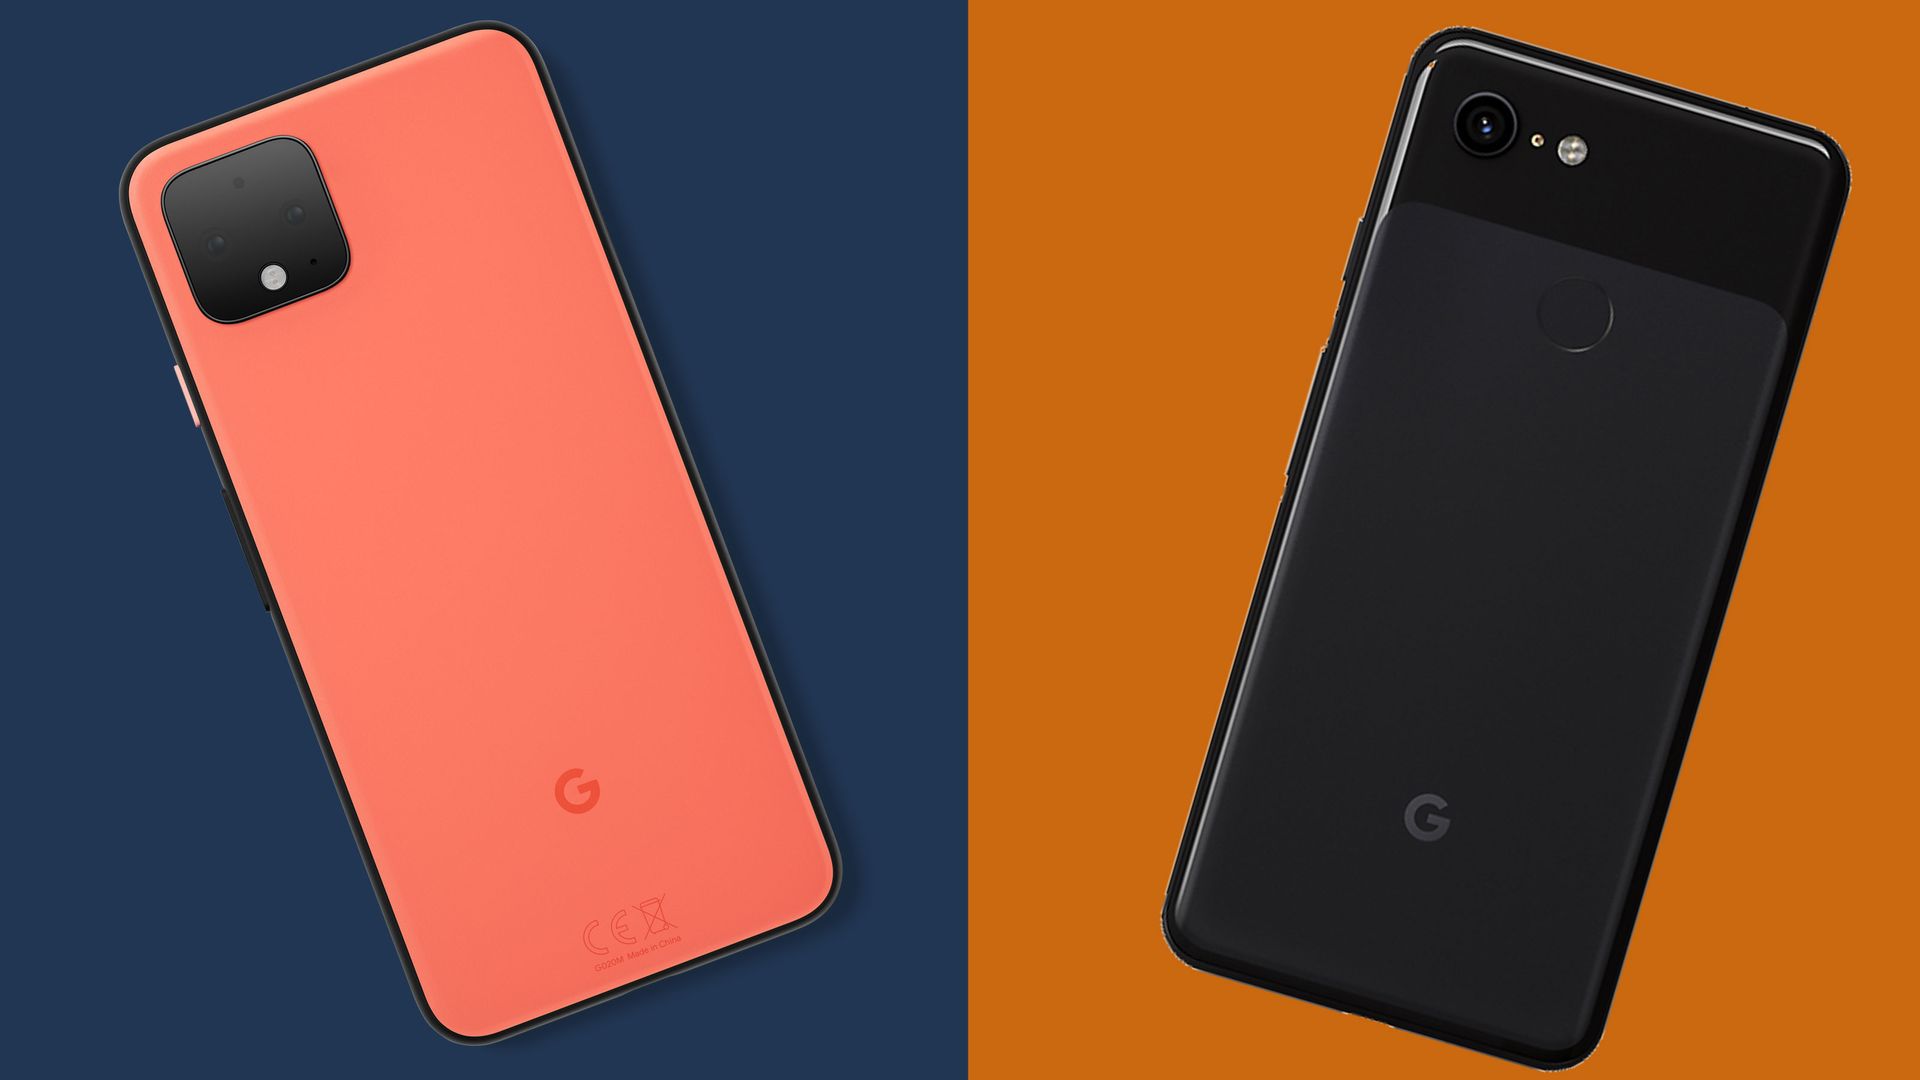 Google Pixel 4 vs Pixel 3 what upgrades does Google's newest phone